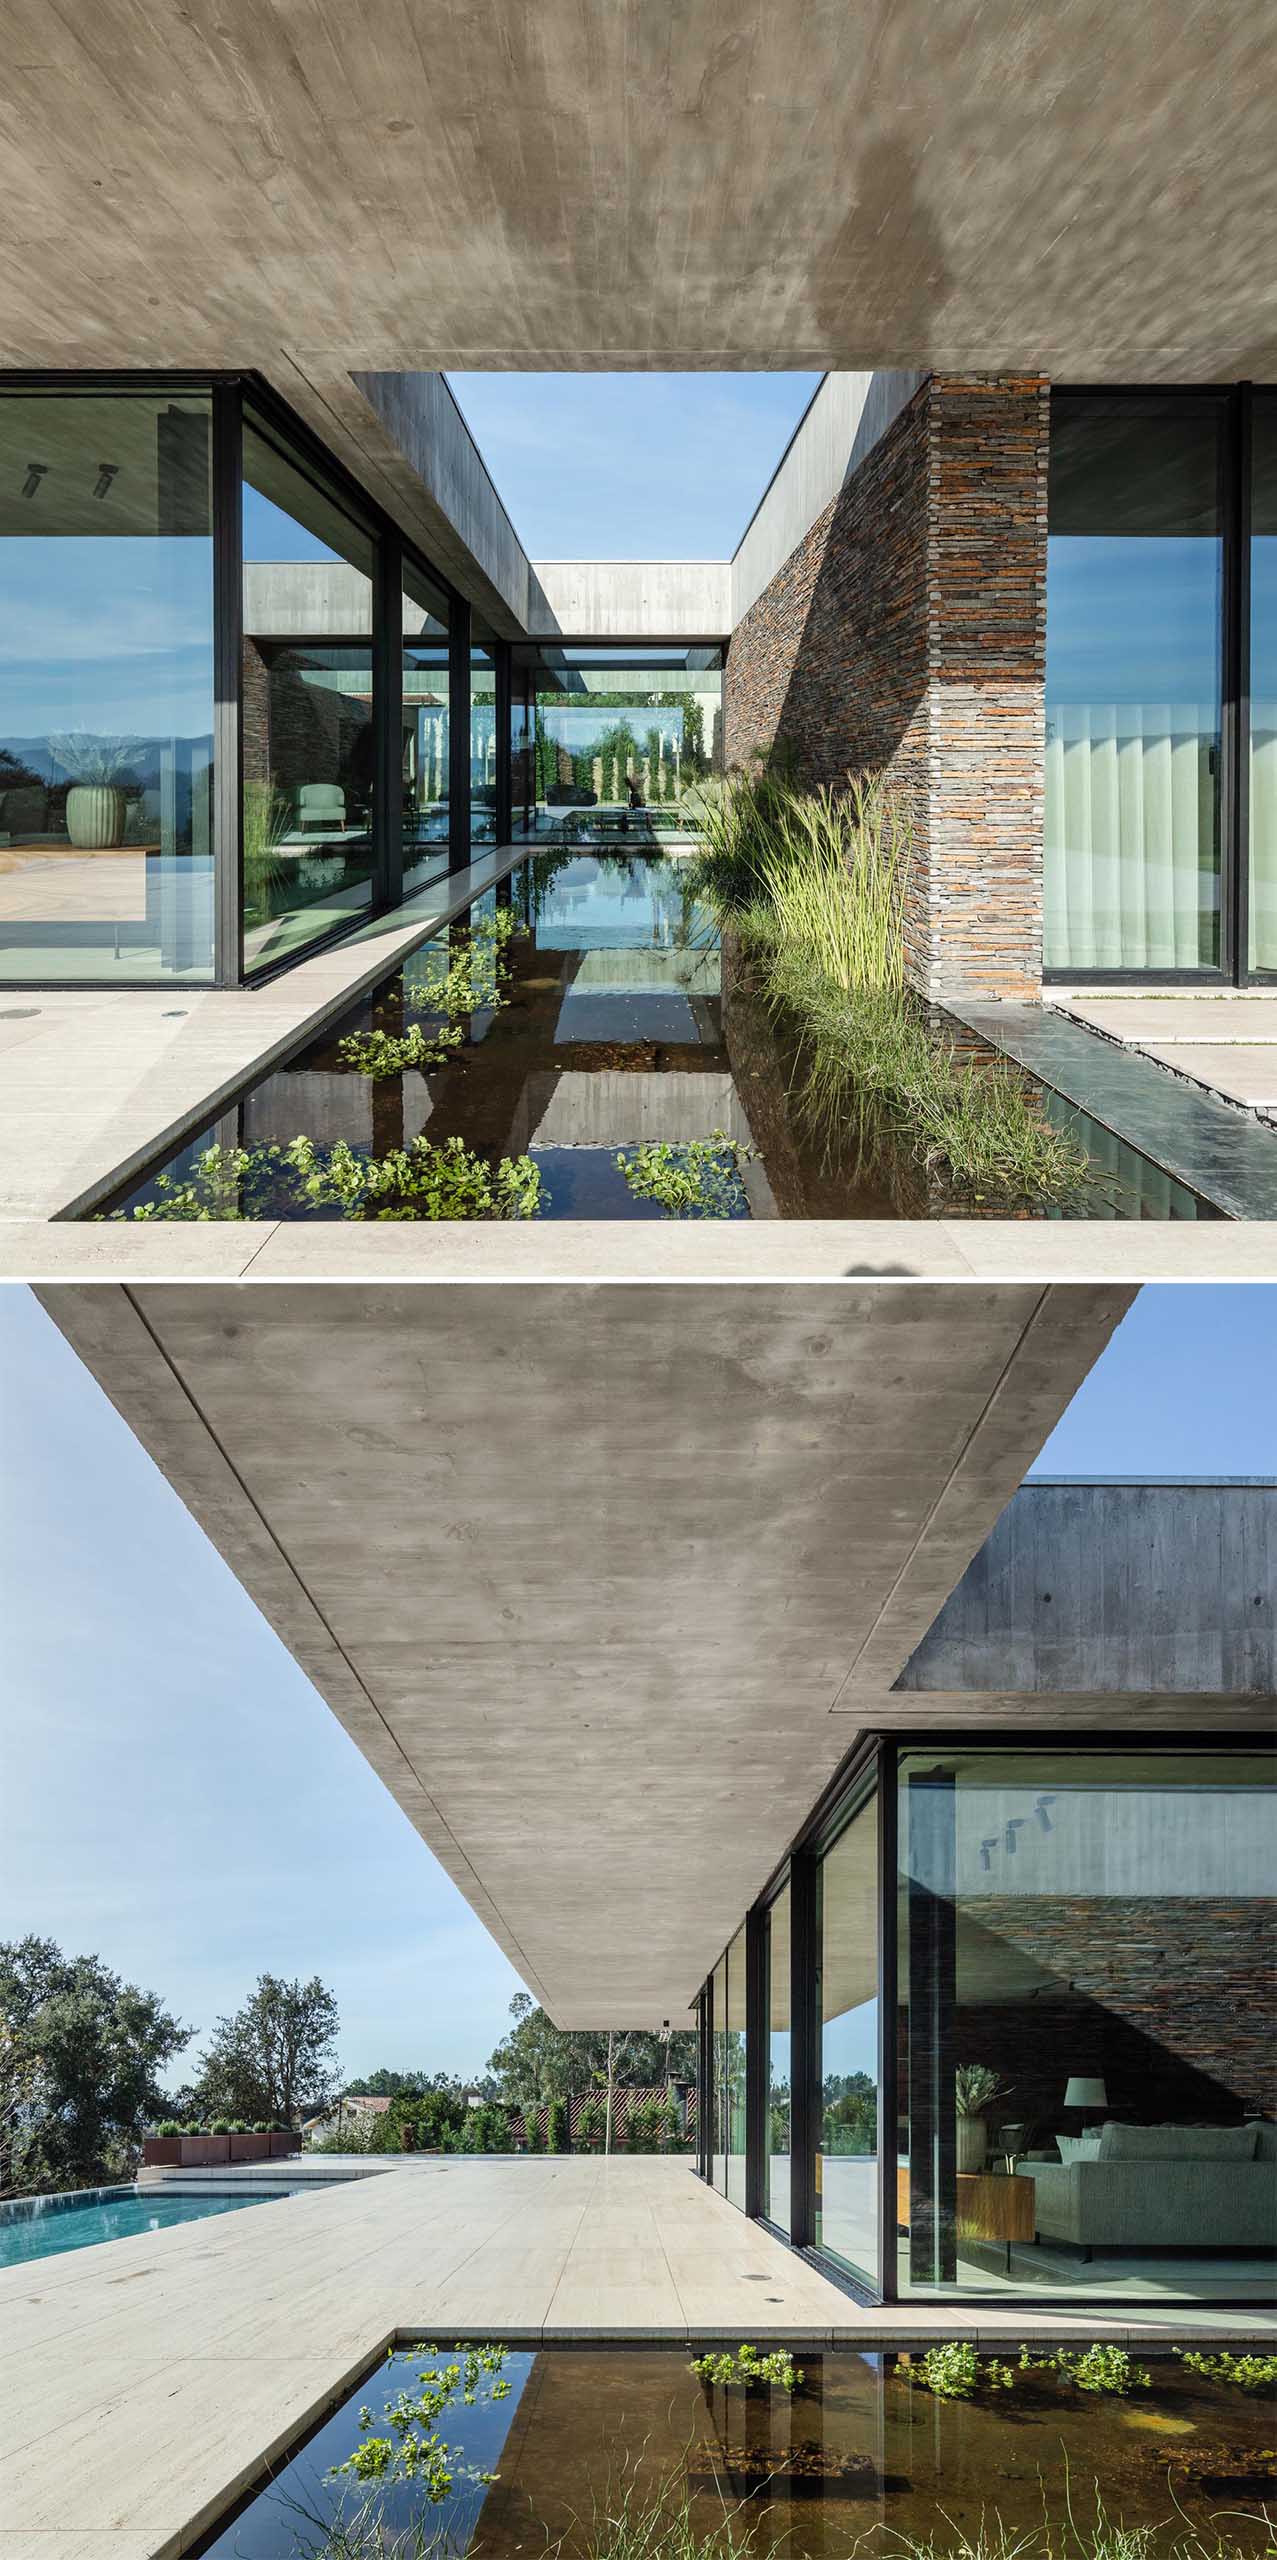 A modern concrete home with glass walls and a water feature.